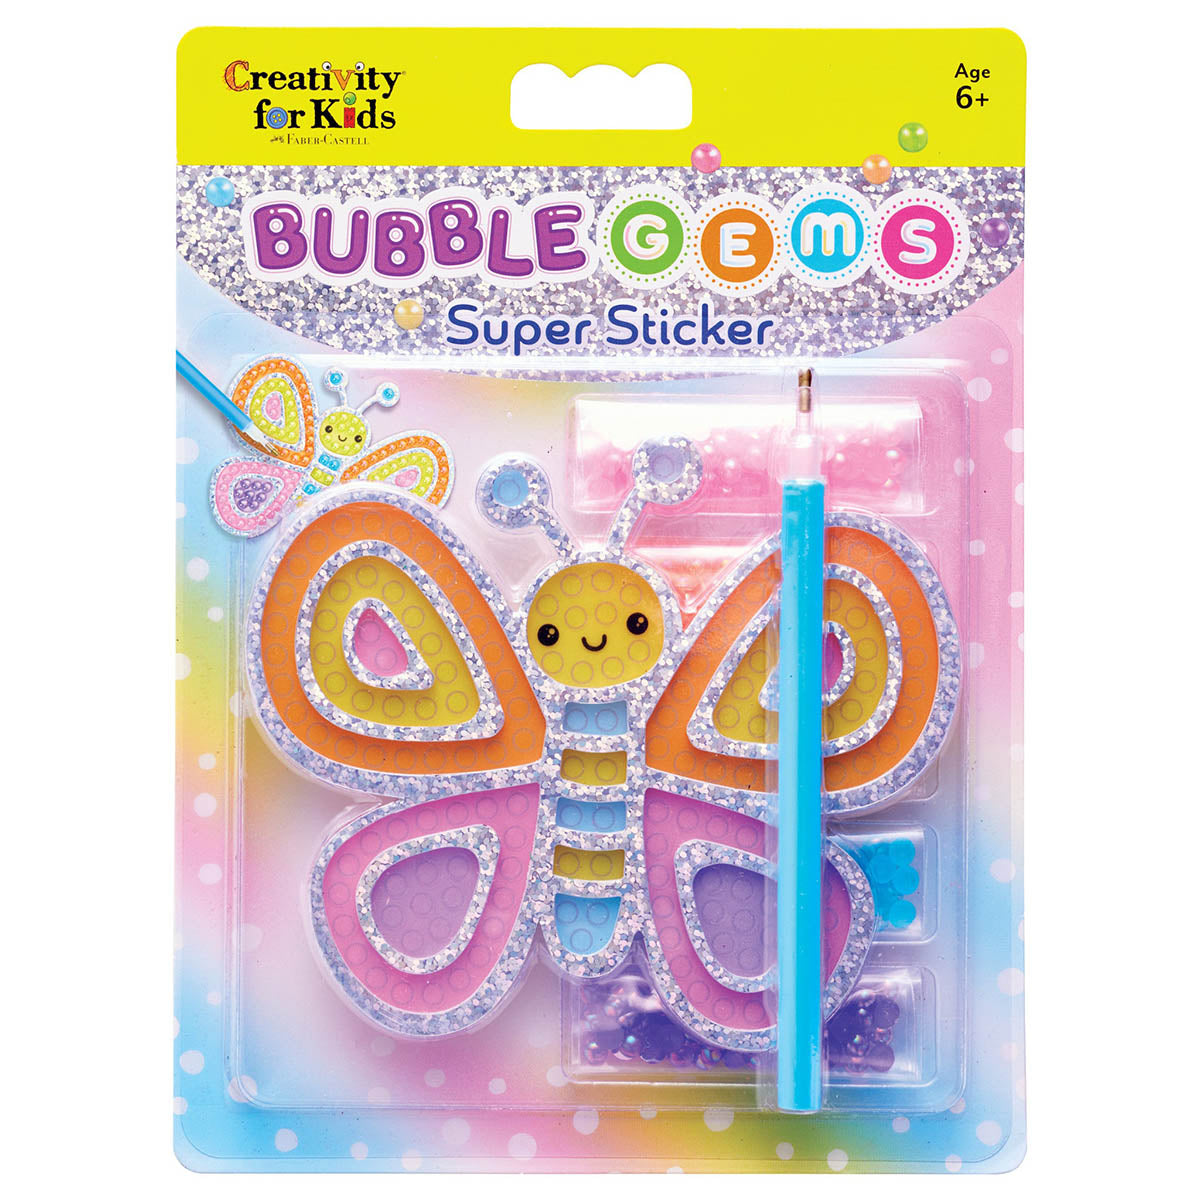 Package of Butterfly Bubble Gems Super Sticker by Creativity for Kids.